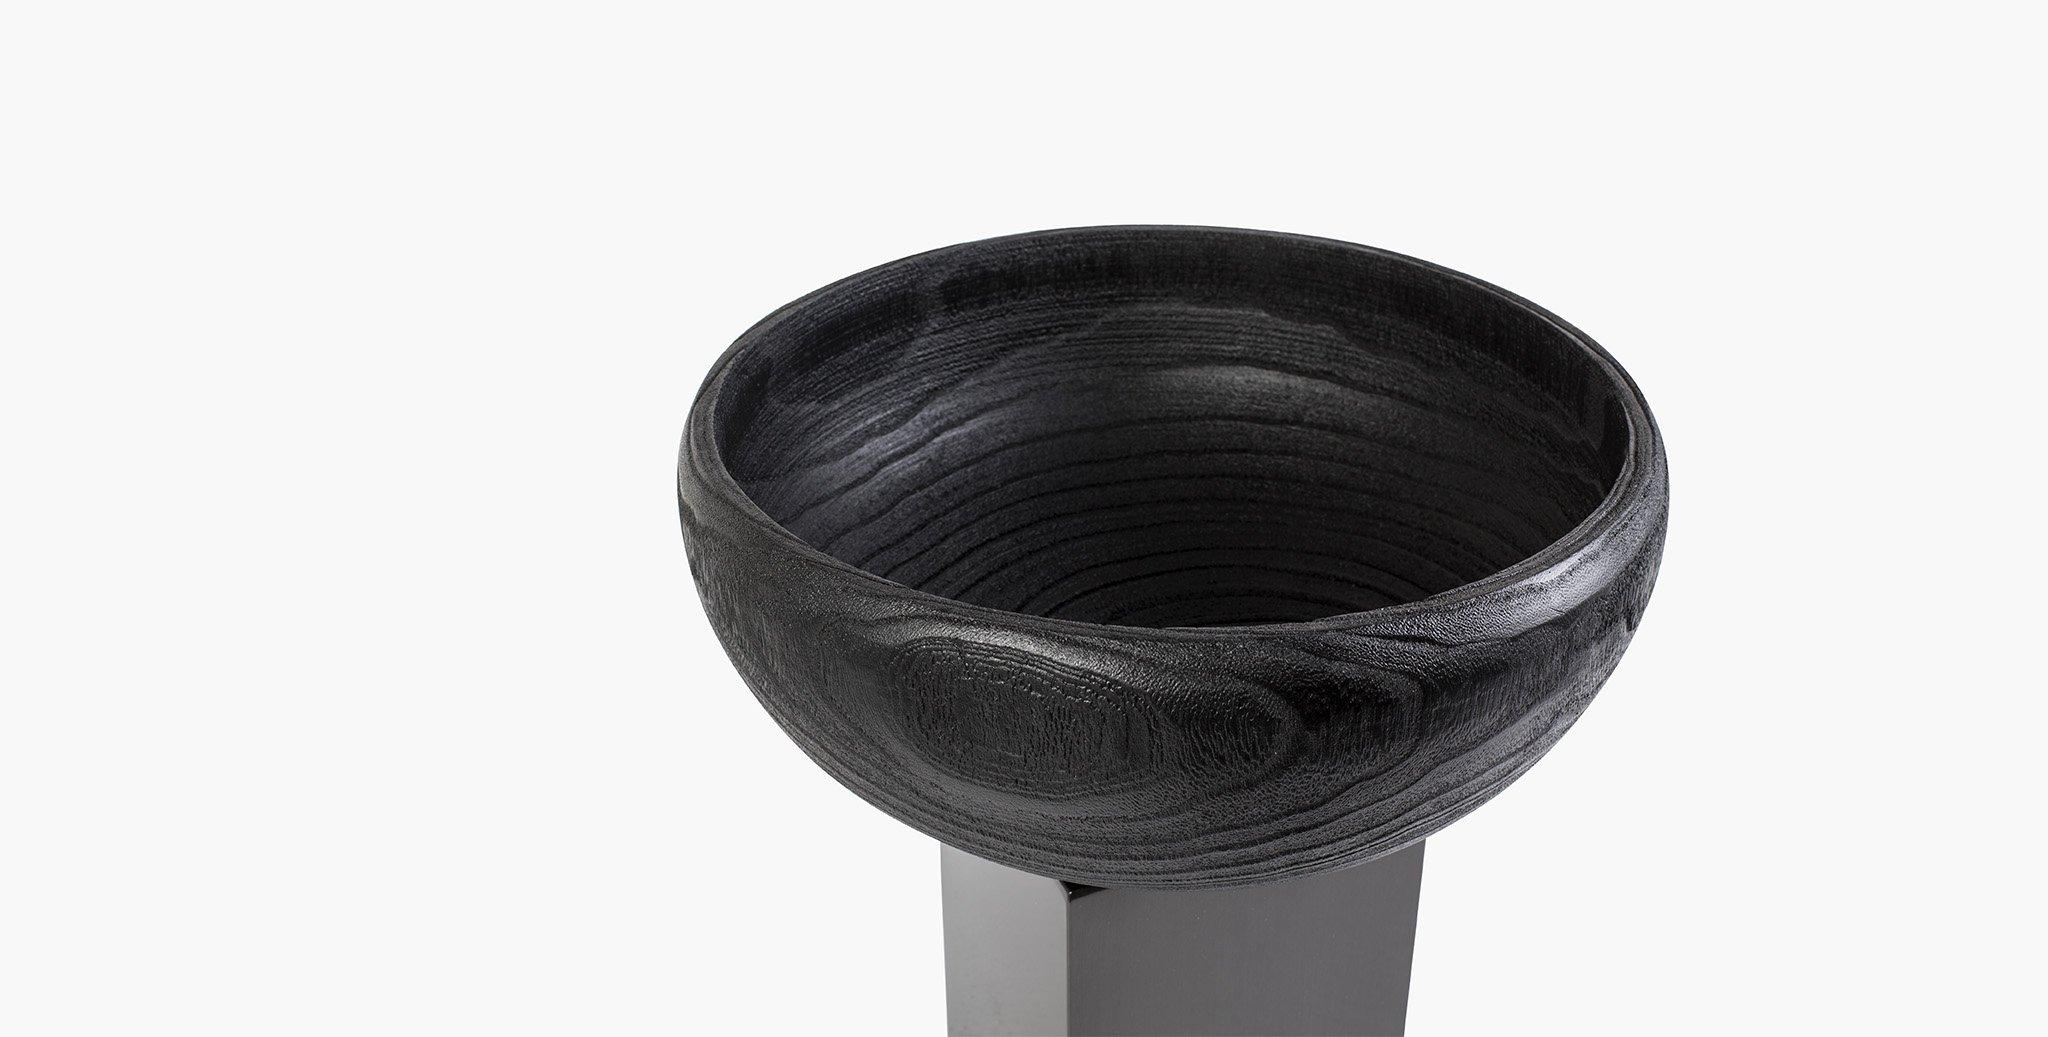 The sculptural Silhouette of our Blackwell vase adds a modern accent to your space. A charcoal finished wood bowl is paired with a blackened steel plinth base. Style alone or add minimal blooms for stunning effect.

Paulowina wood
Charcoal